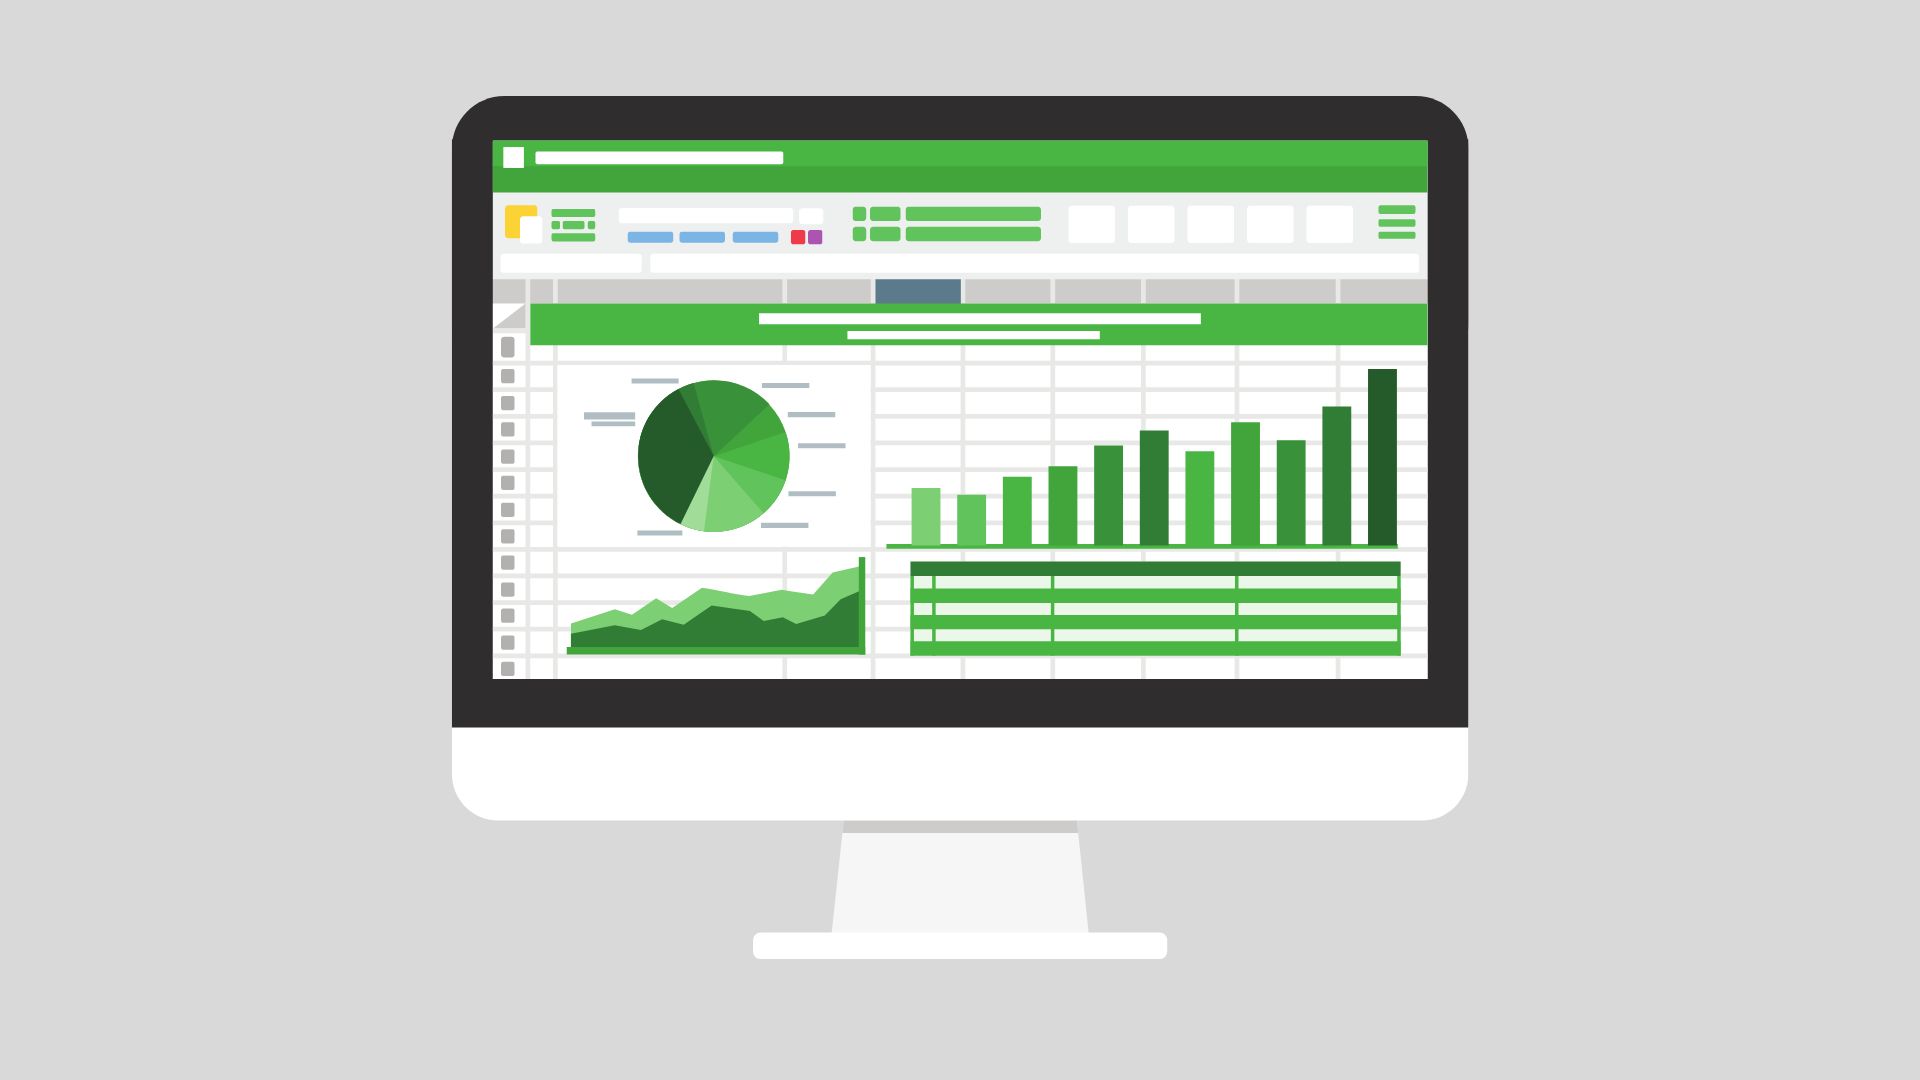 Illustration of a desktop computer showing a chart, spreadsheet, and bar graph in green.